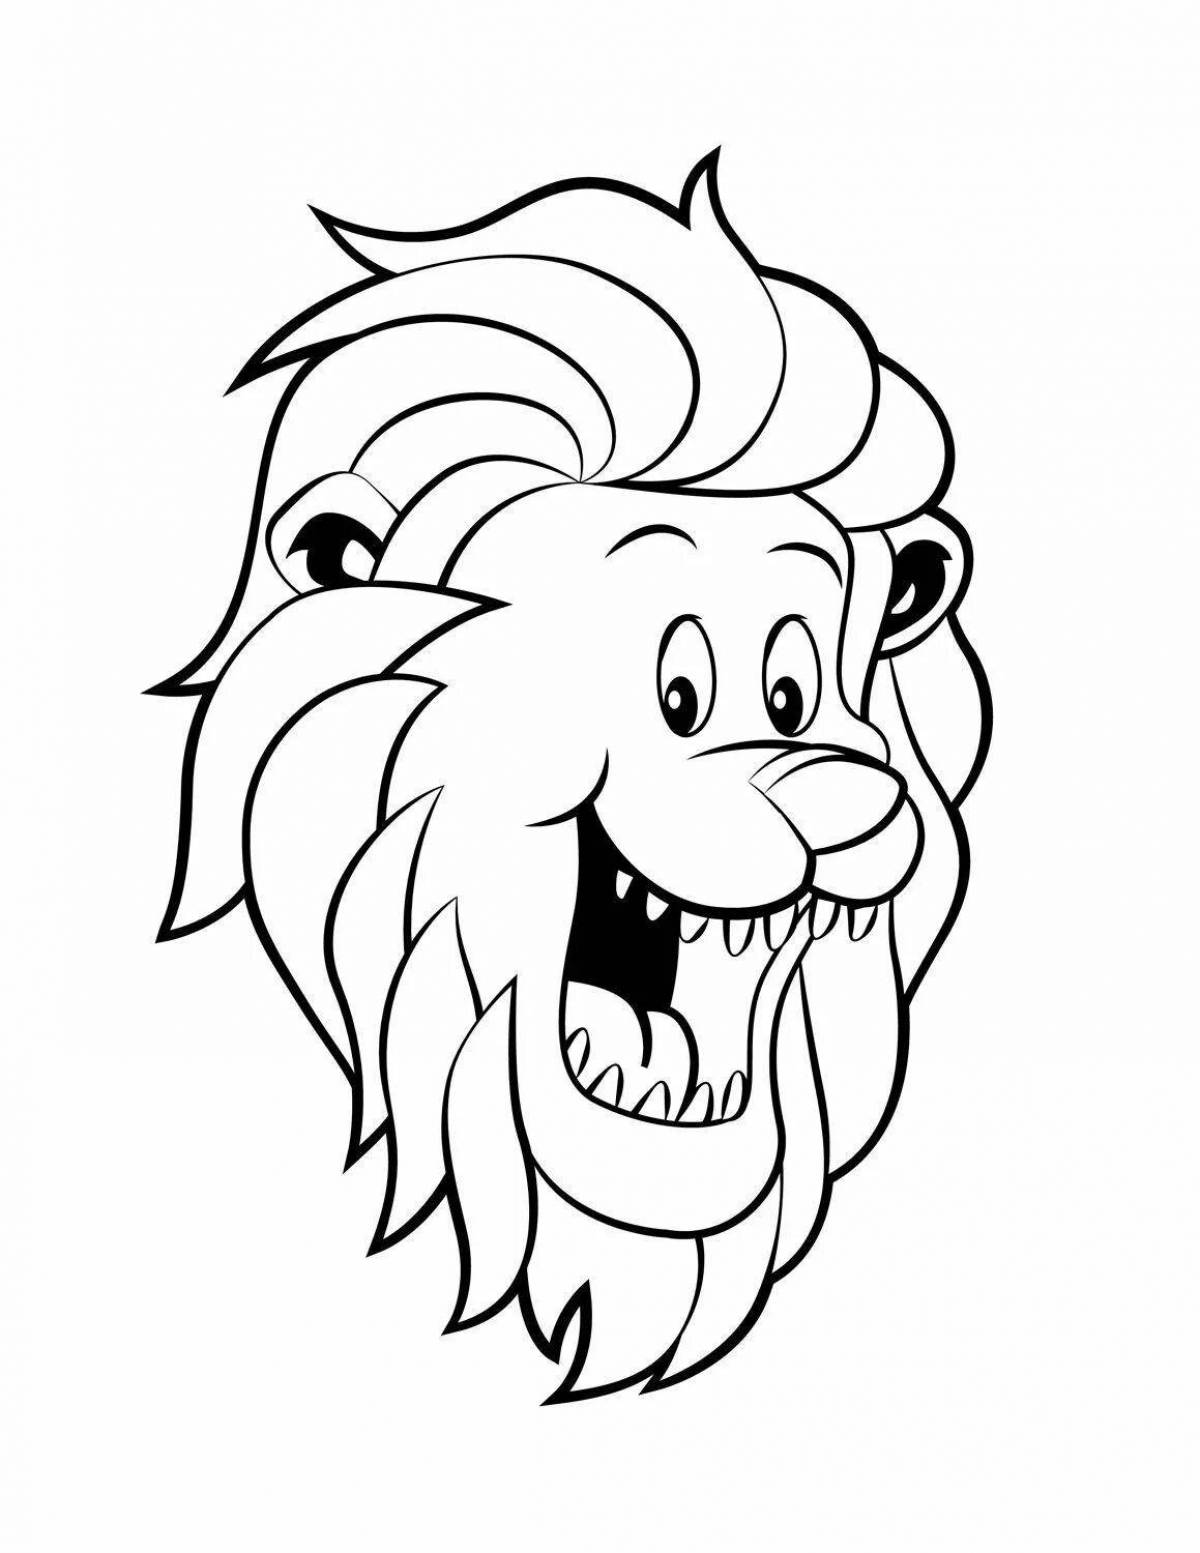 Flowering lion head coloring page